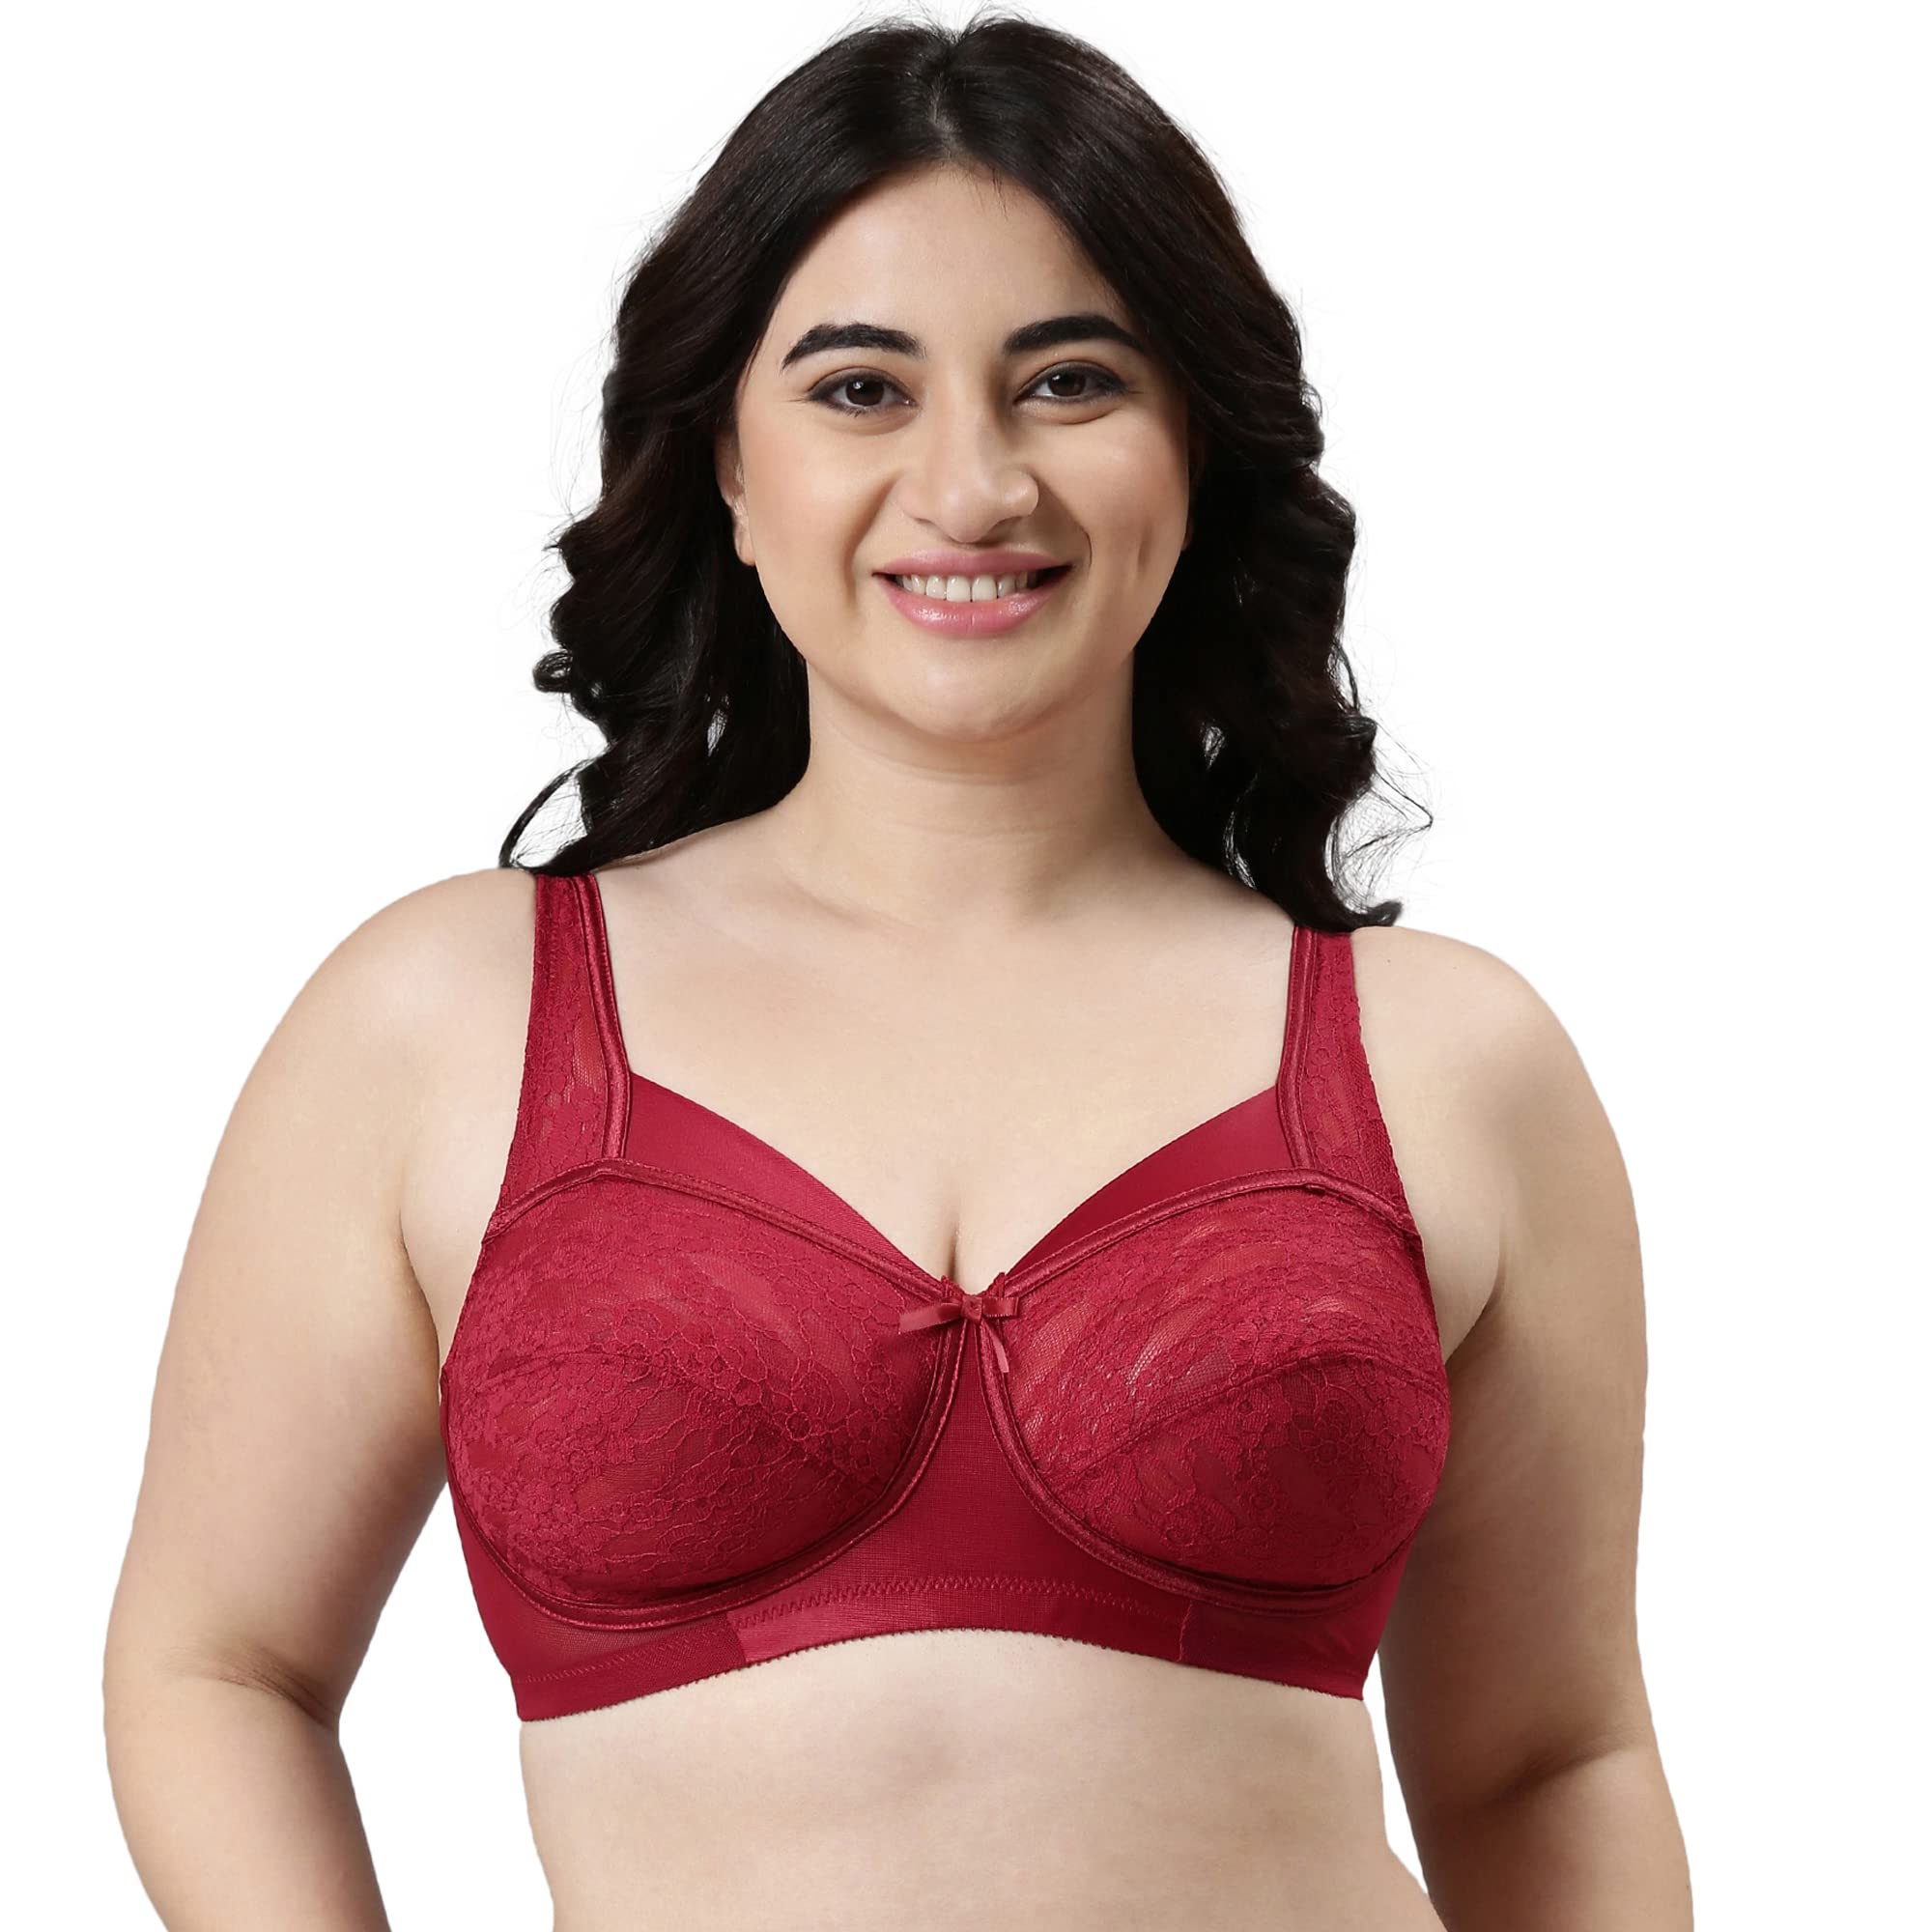 Enamor F035 Support Bra - Non-Padded Wired High Coverage 34C Black